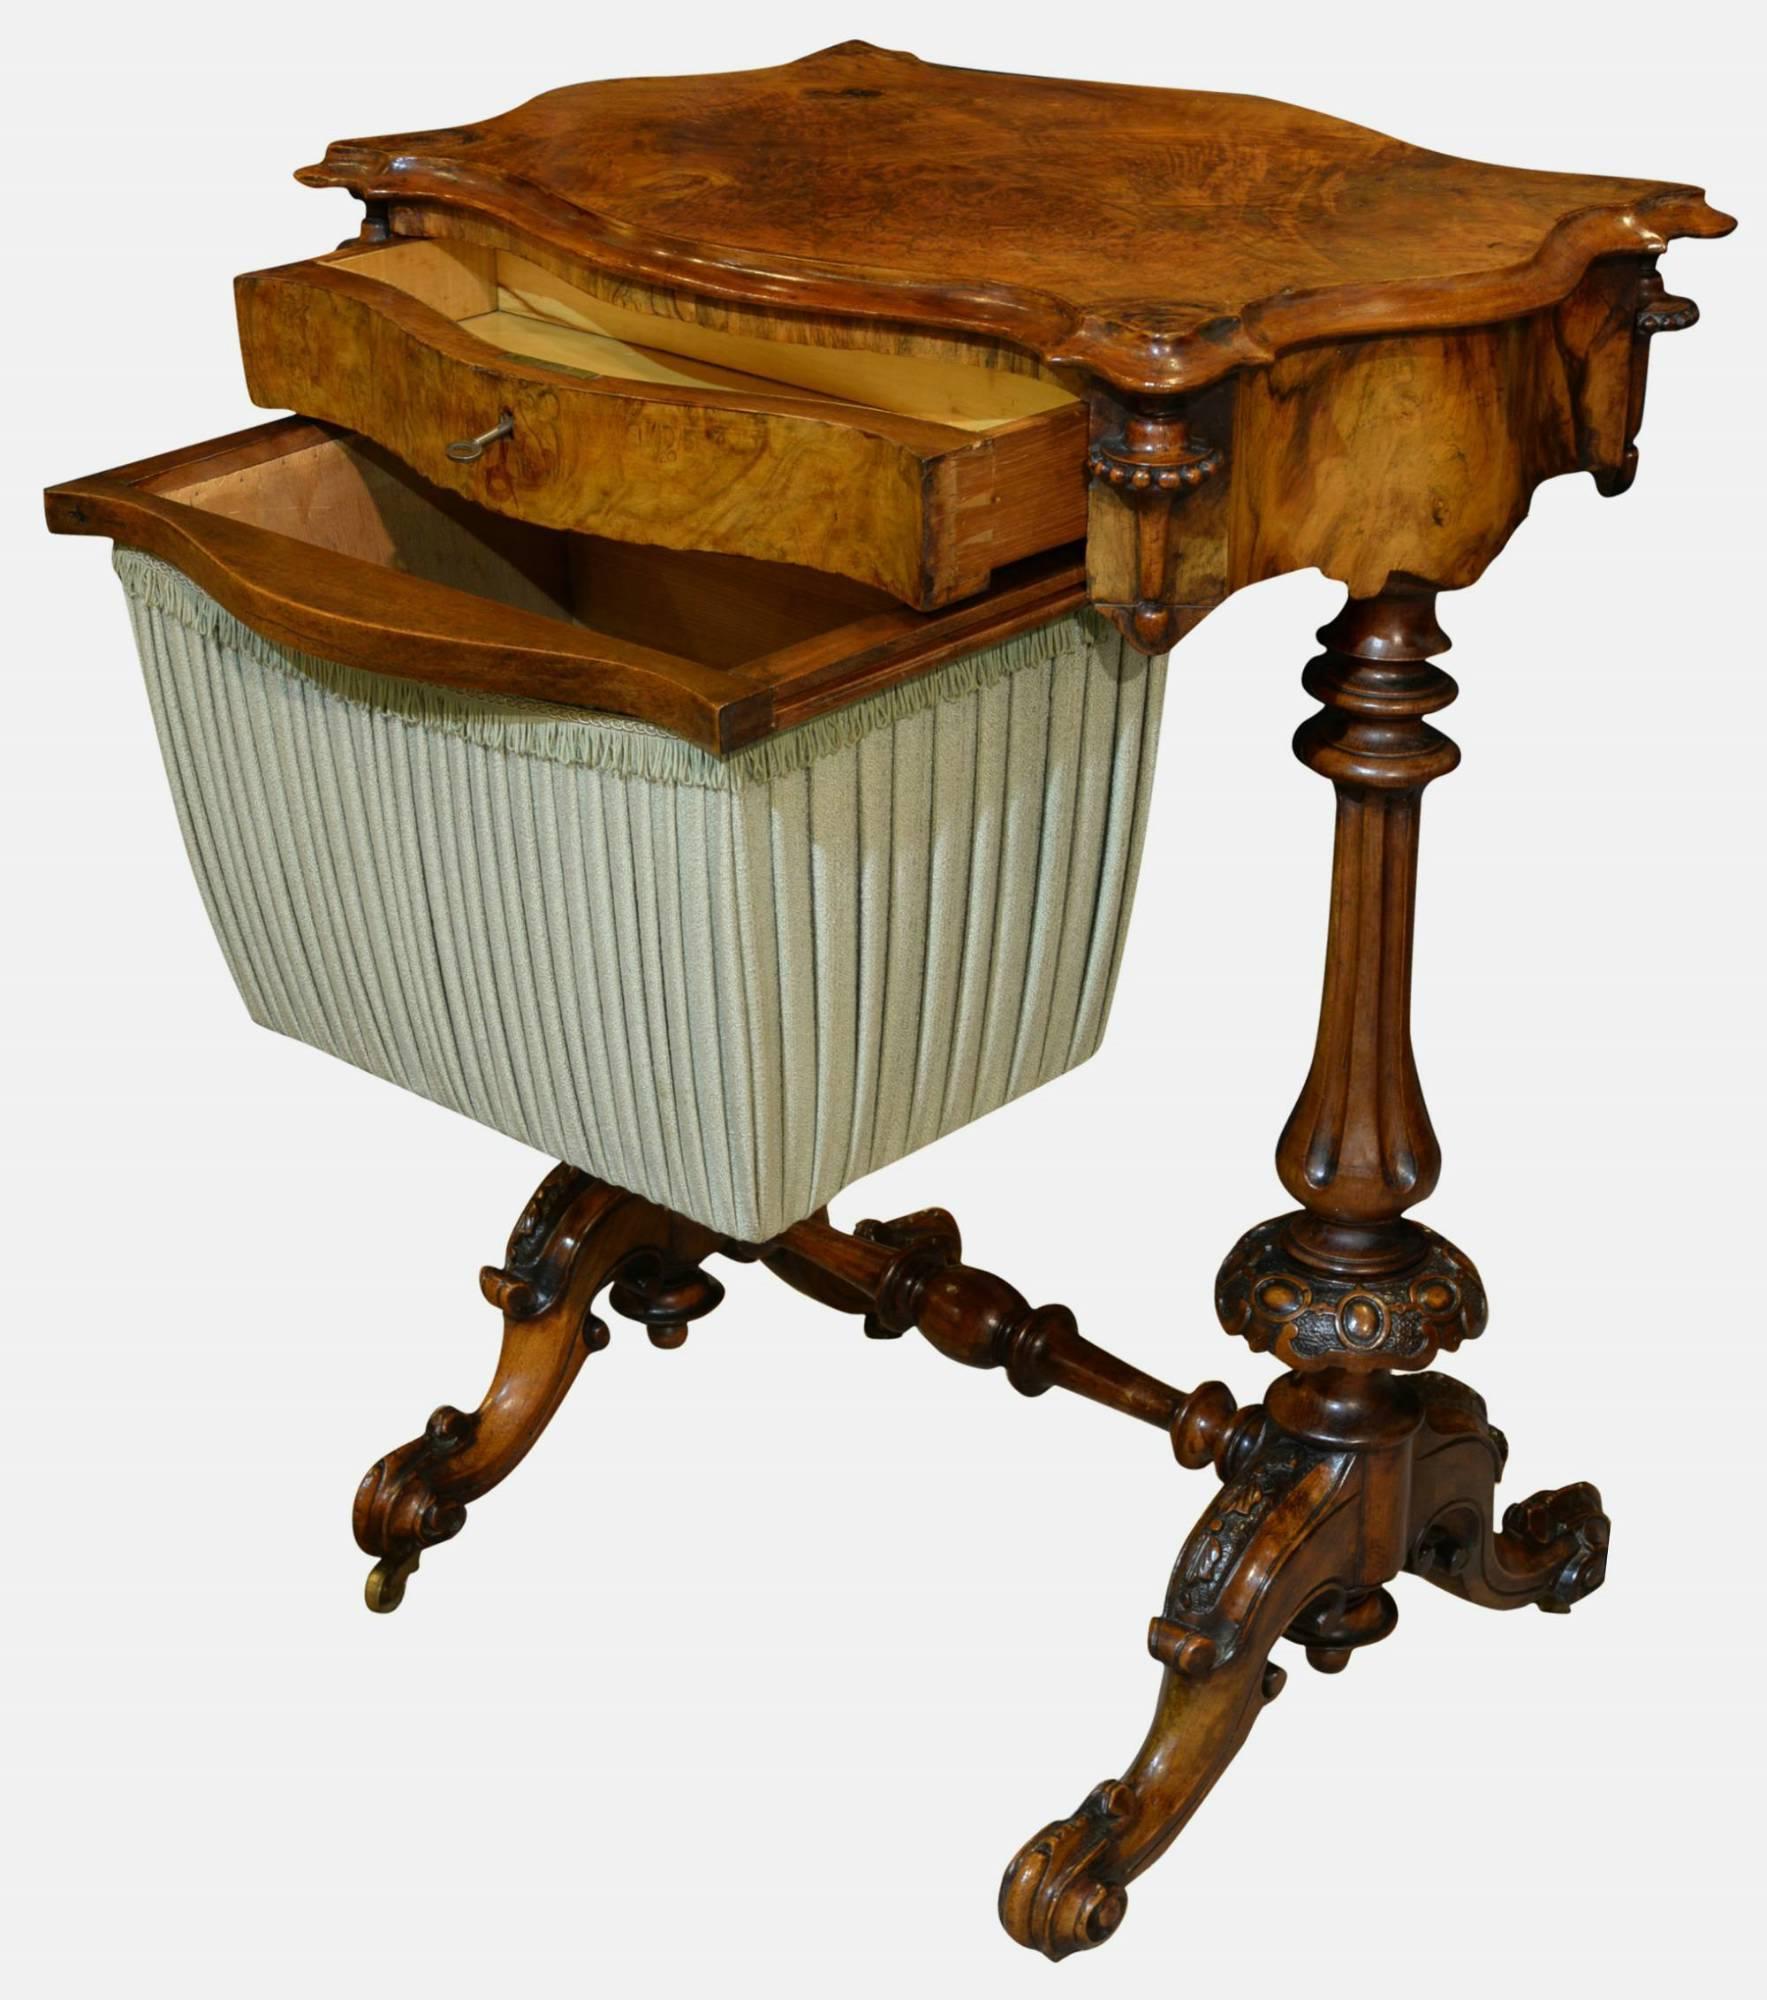 19th Century Decorative High Victorian Sewing Table